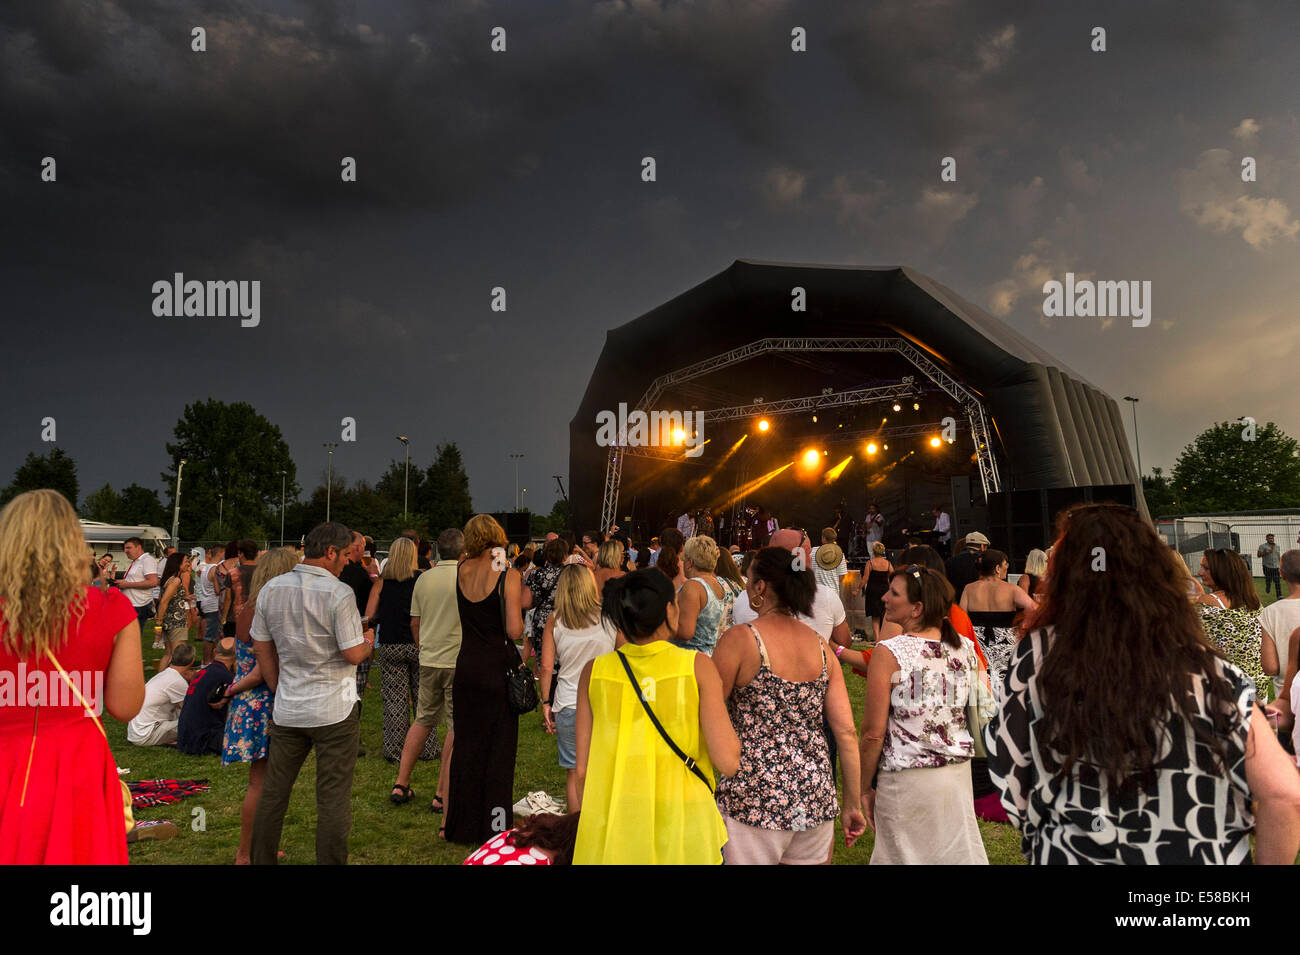 Bad weather approaching the Brentwood Festival in Essex, UK. Stock Photo